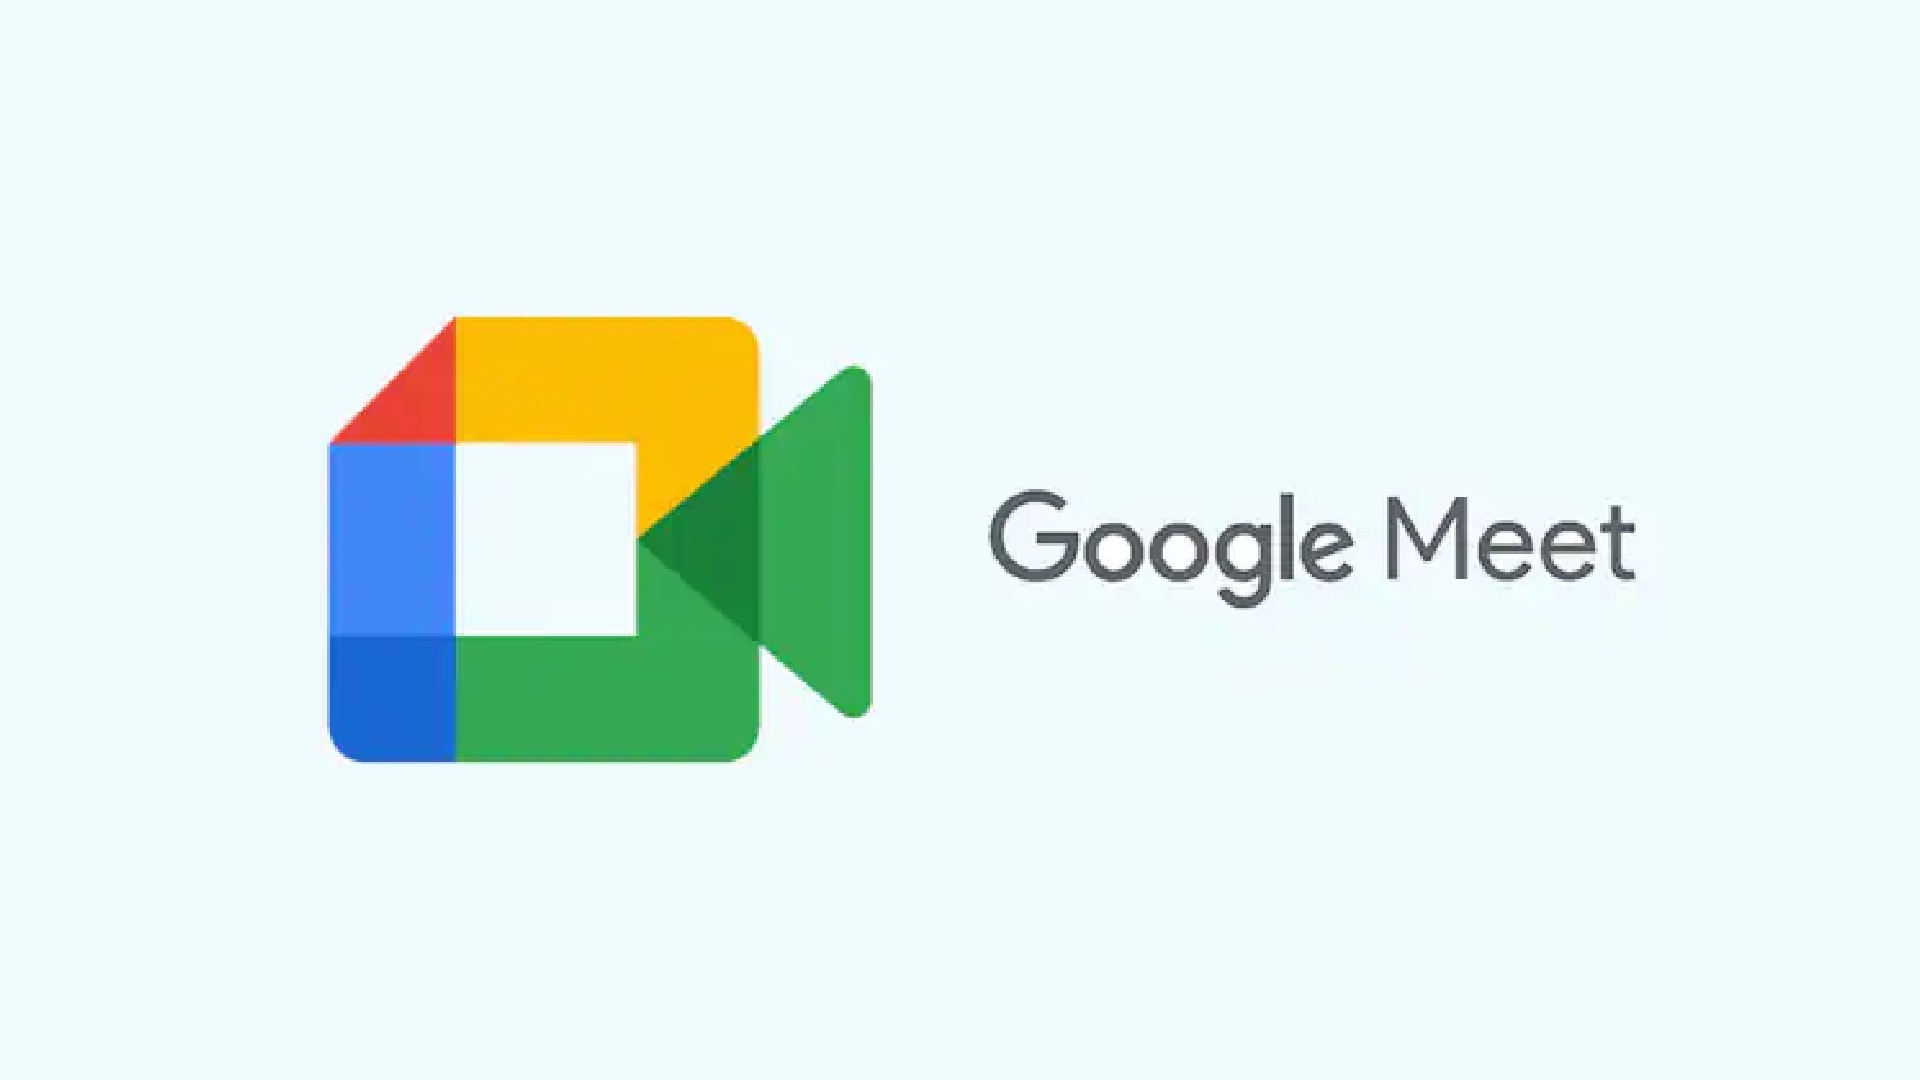 Google Meet has Capped the Call Duration for Free Members